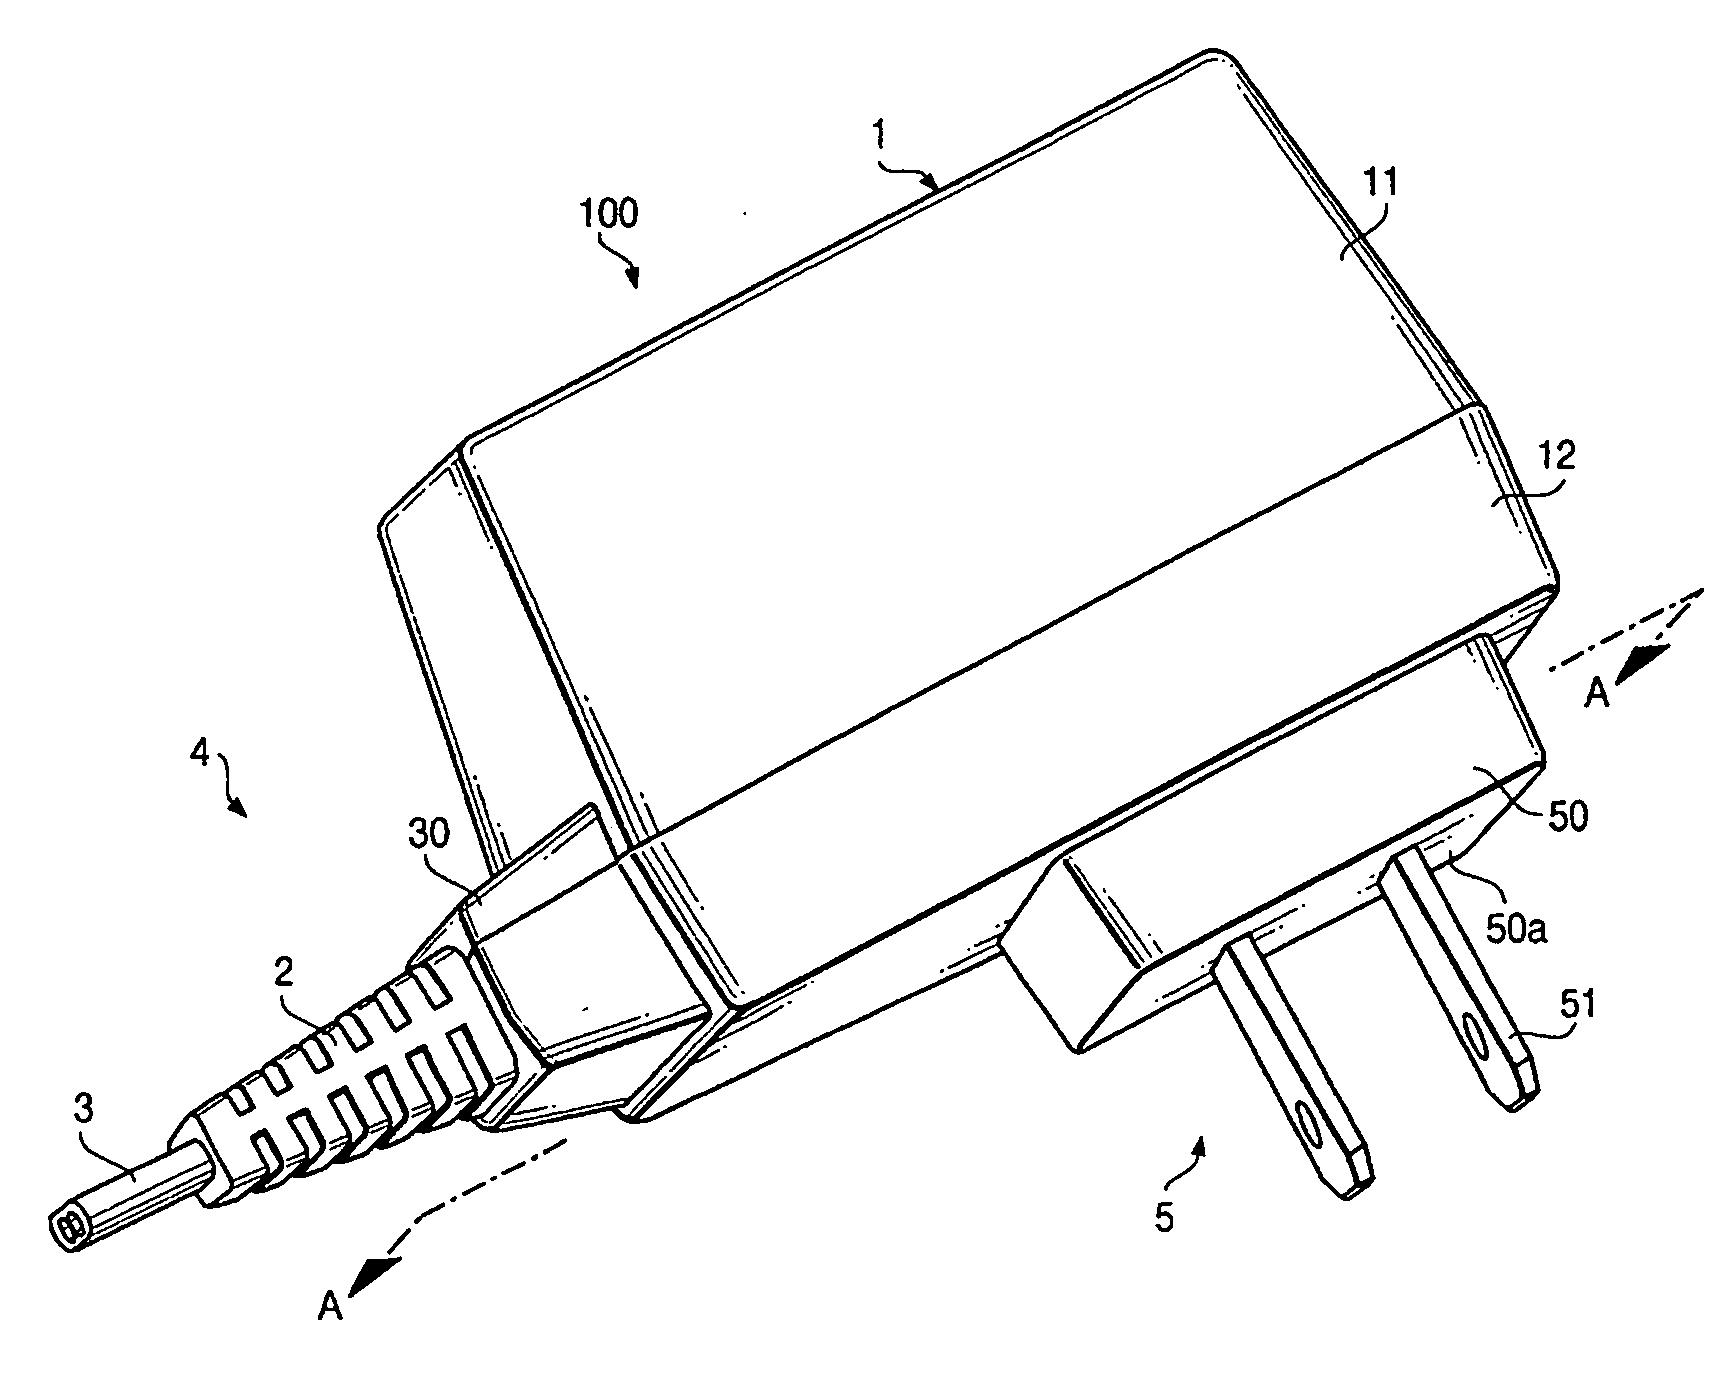 Waterproof case for electrical apparatus